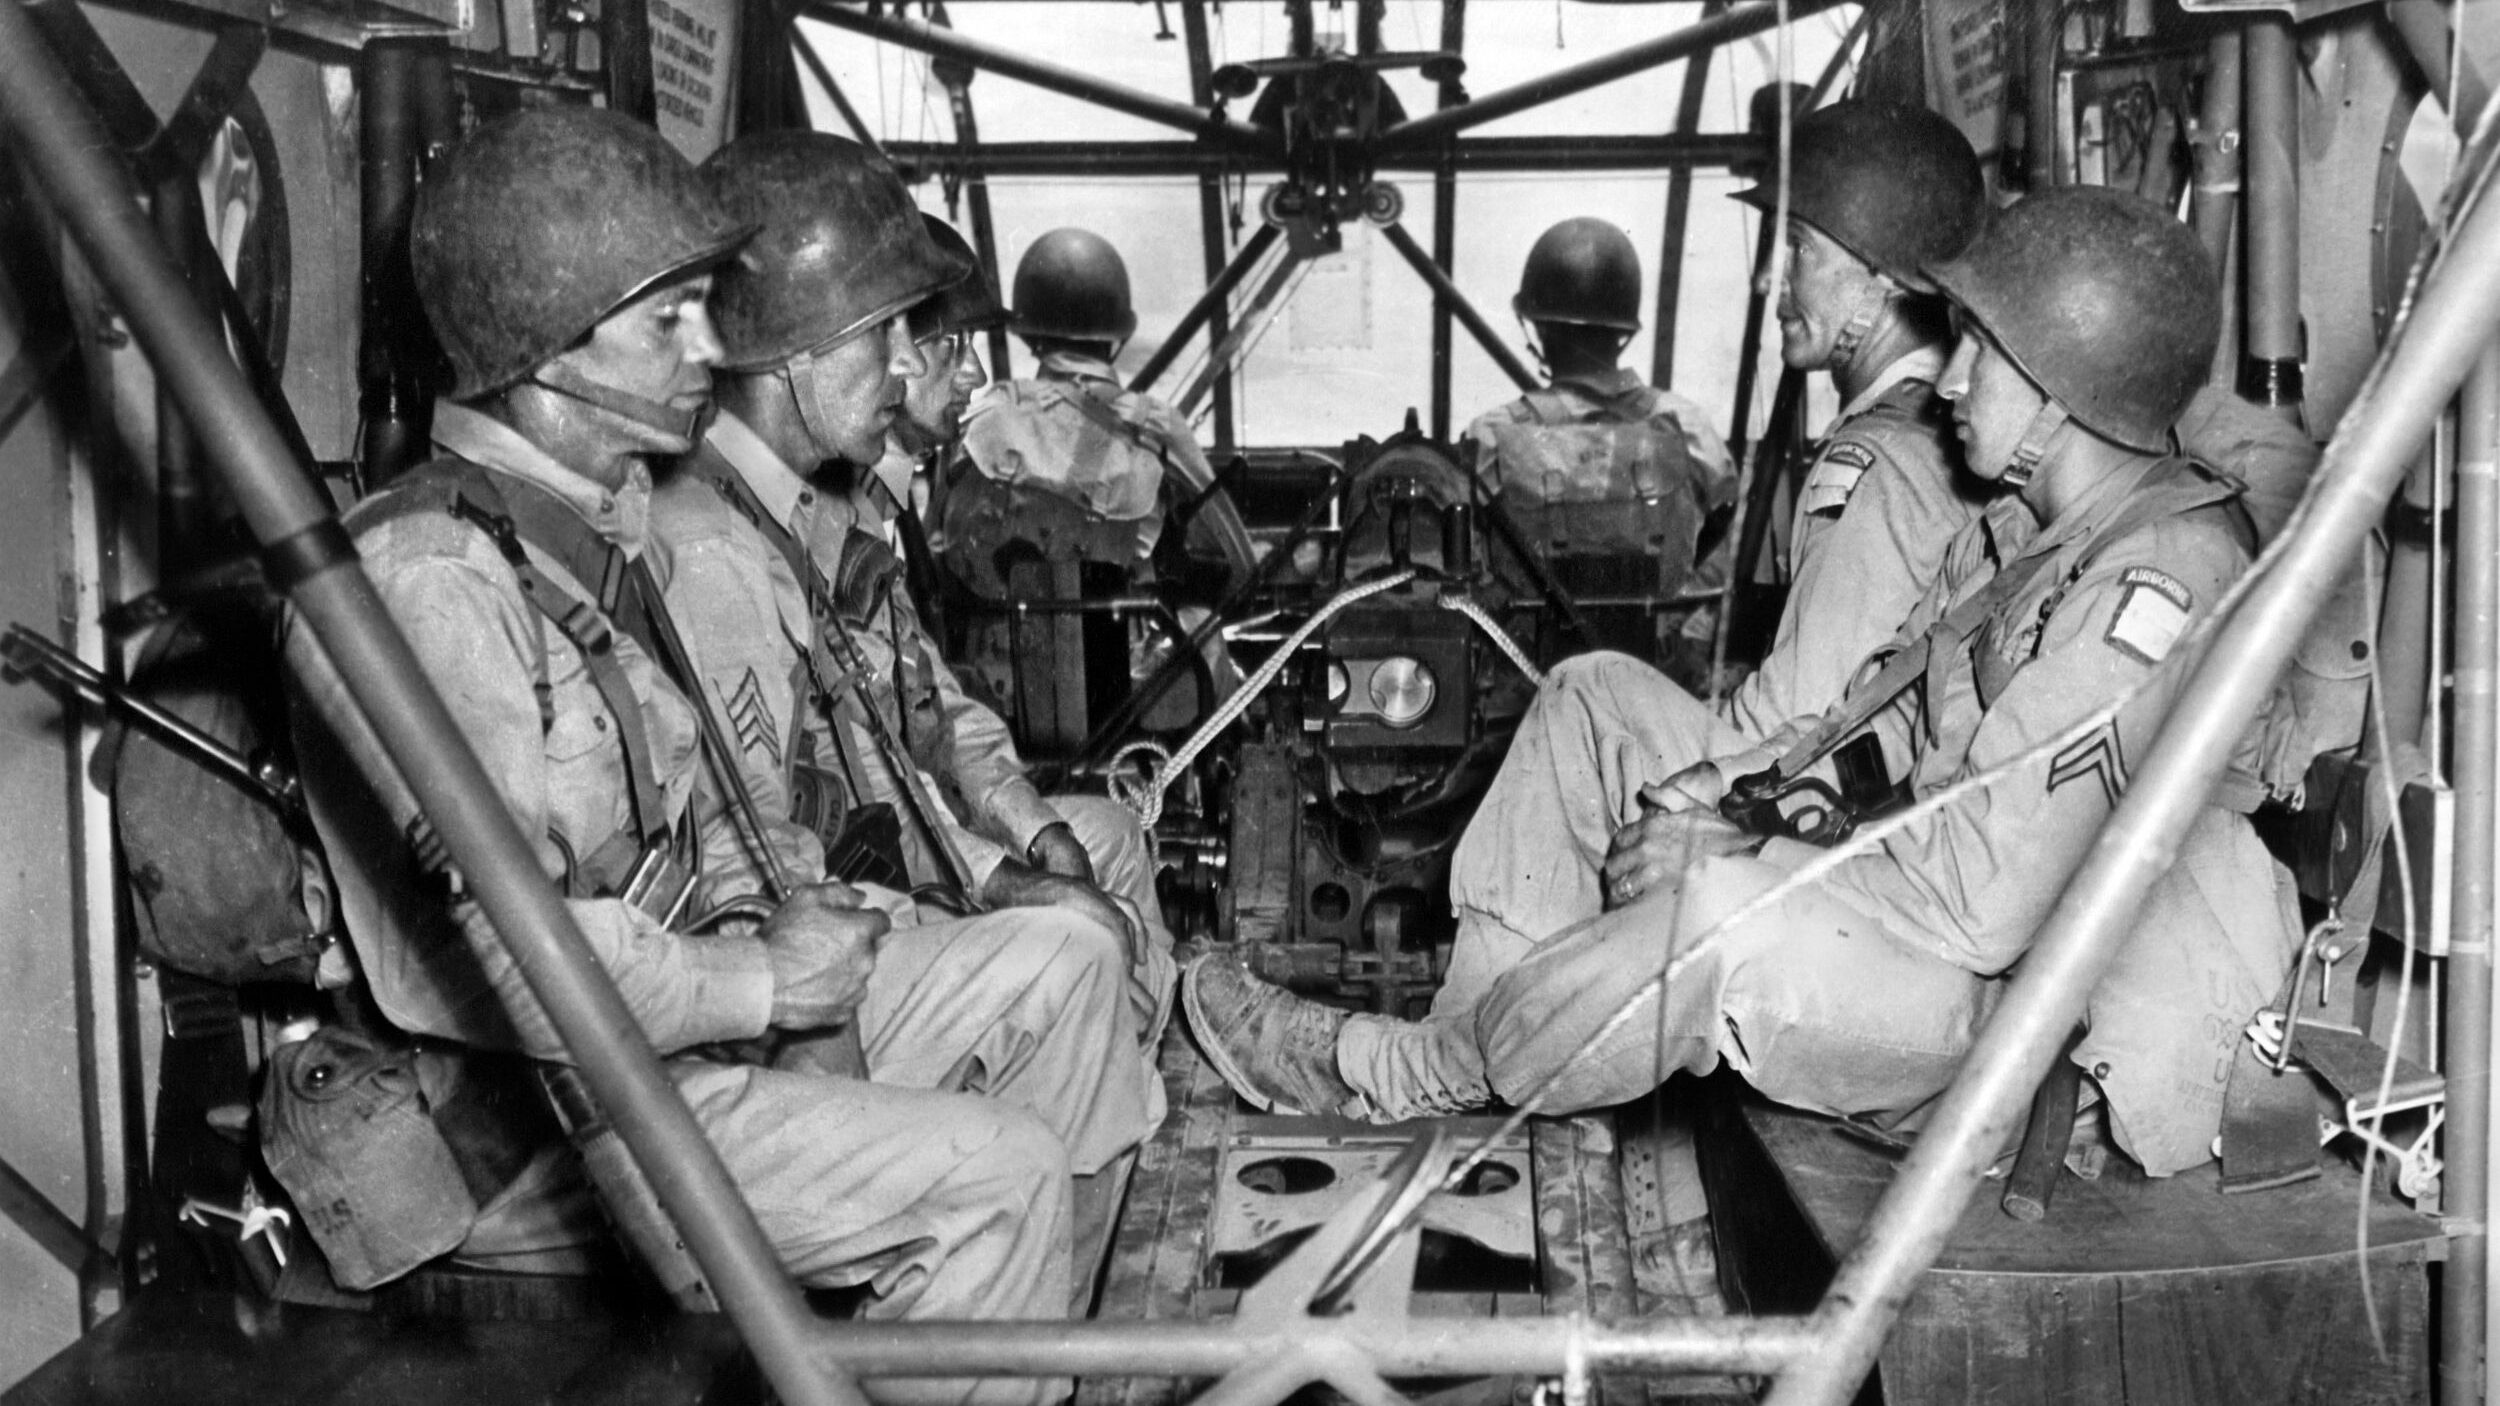 Five 82nd Airborne troopers, plus a pilot and co-pilot, are photographed with a 1,439-lb. 75mm pack howitzer inside a CG-4A “Waco” glider during training in Morocco prior to the June 1943 invasion of Sicily. The glider forces sustained heavy losses during Operation Husky.